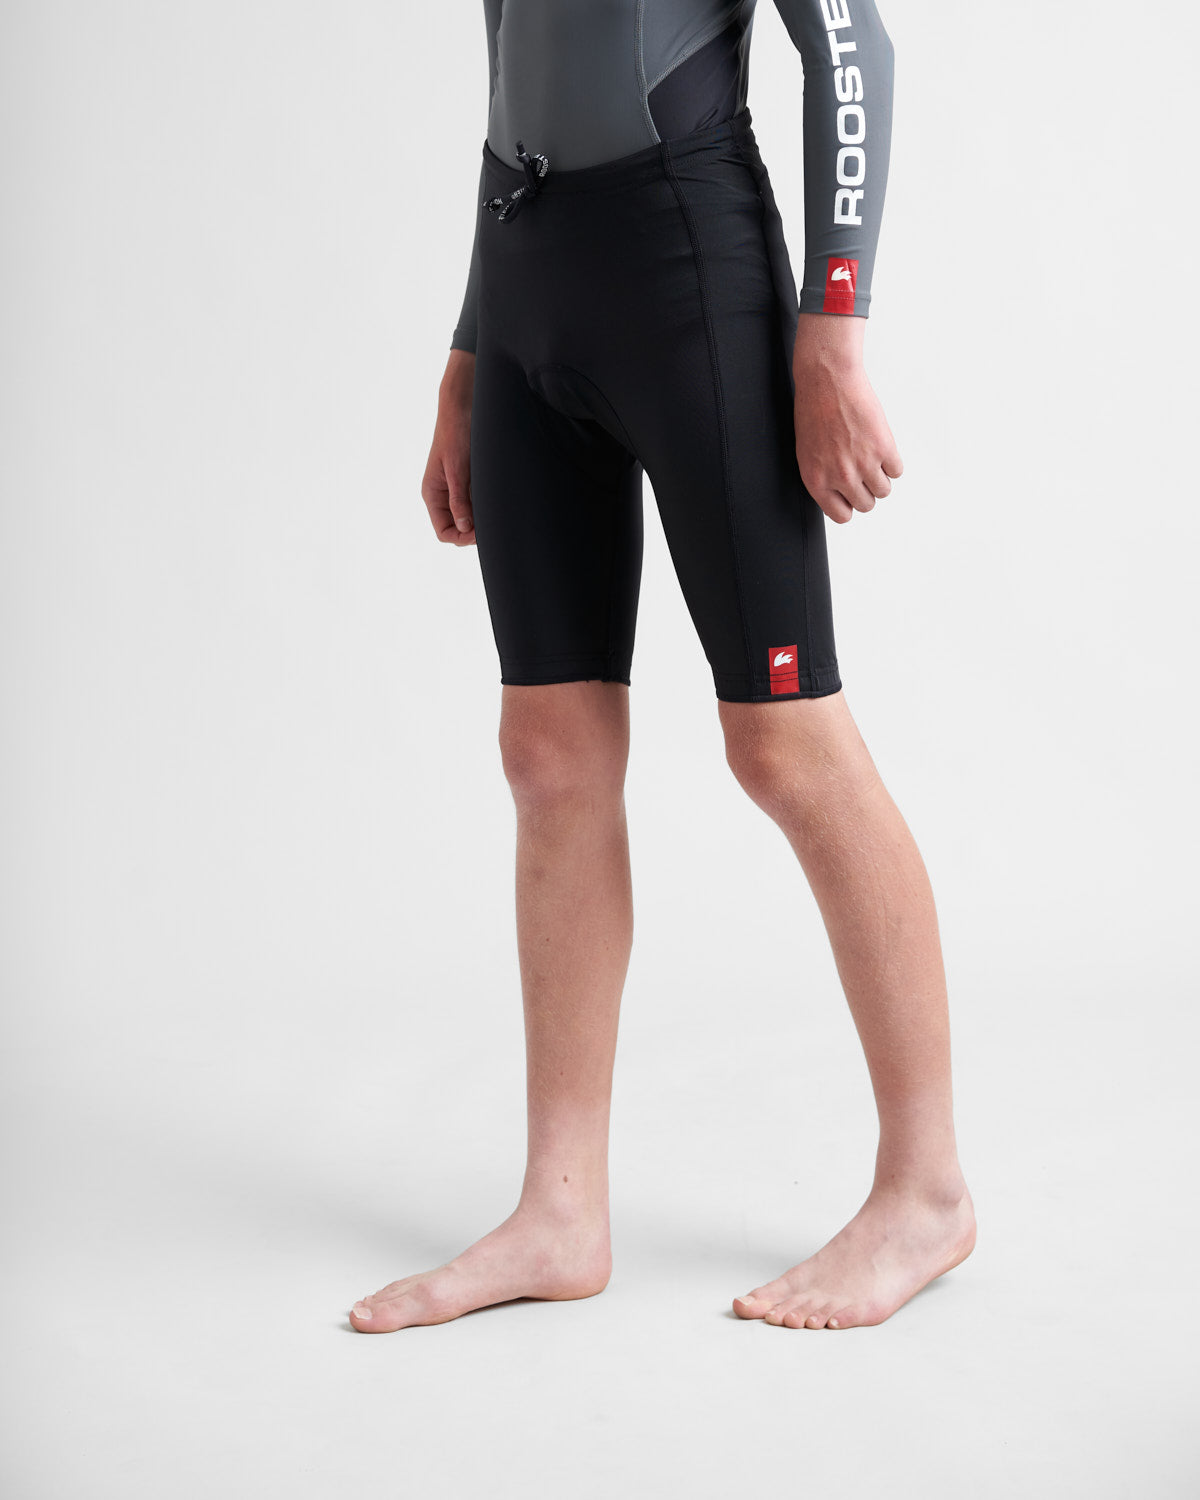 JUNIOR Wear Protection Shorts